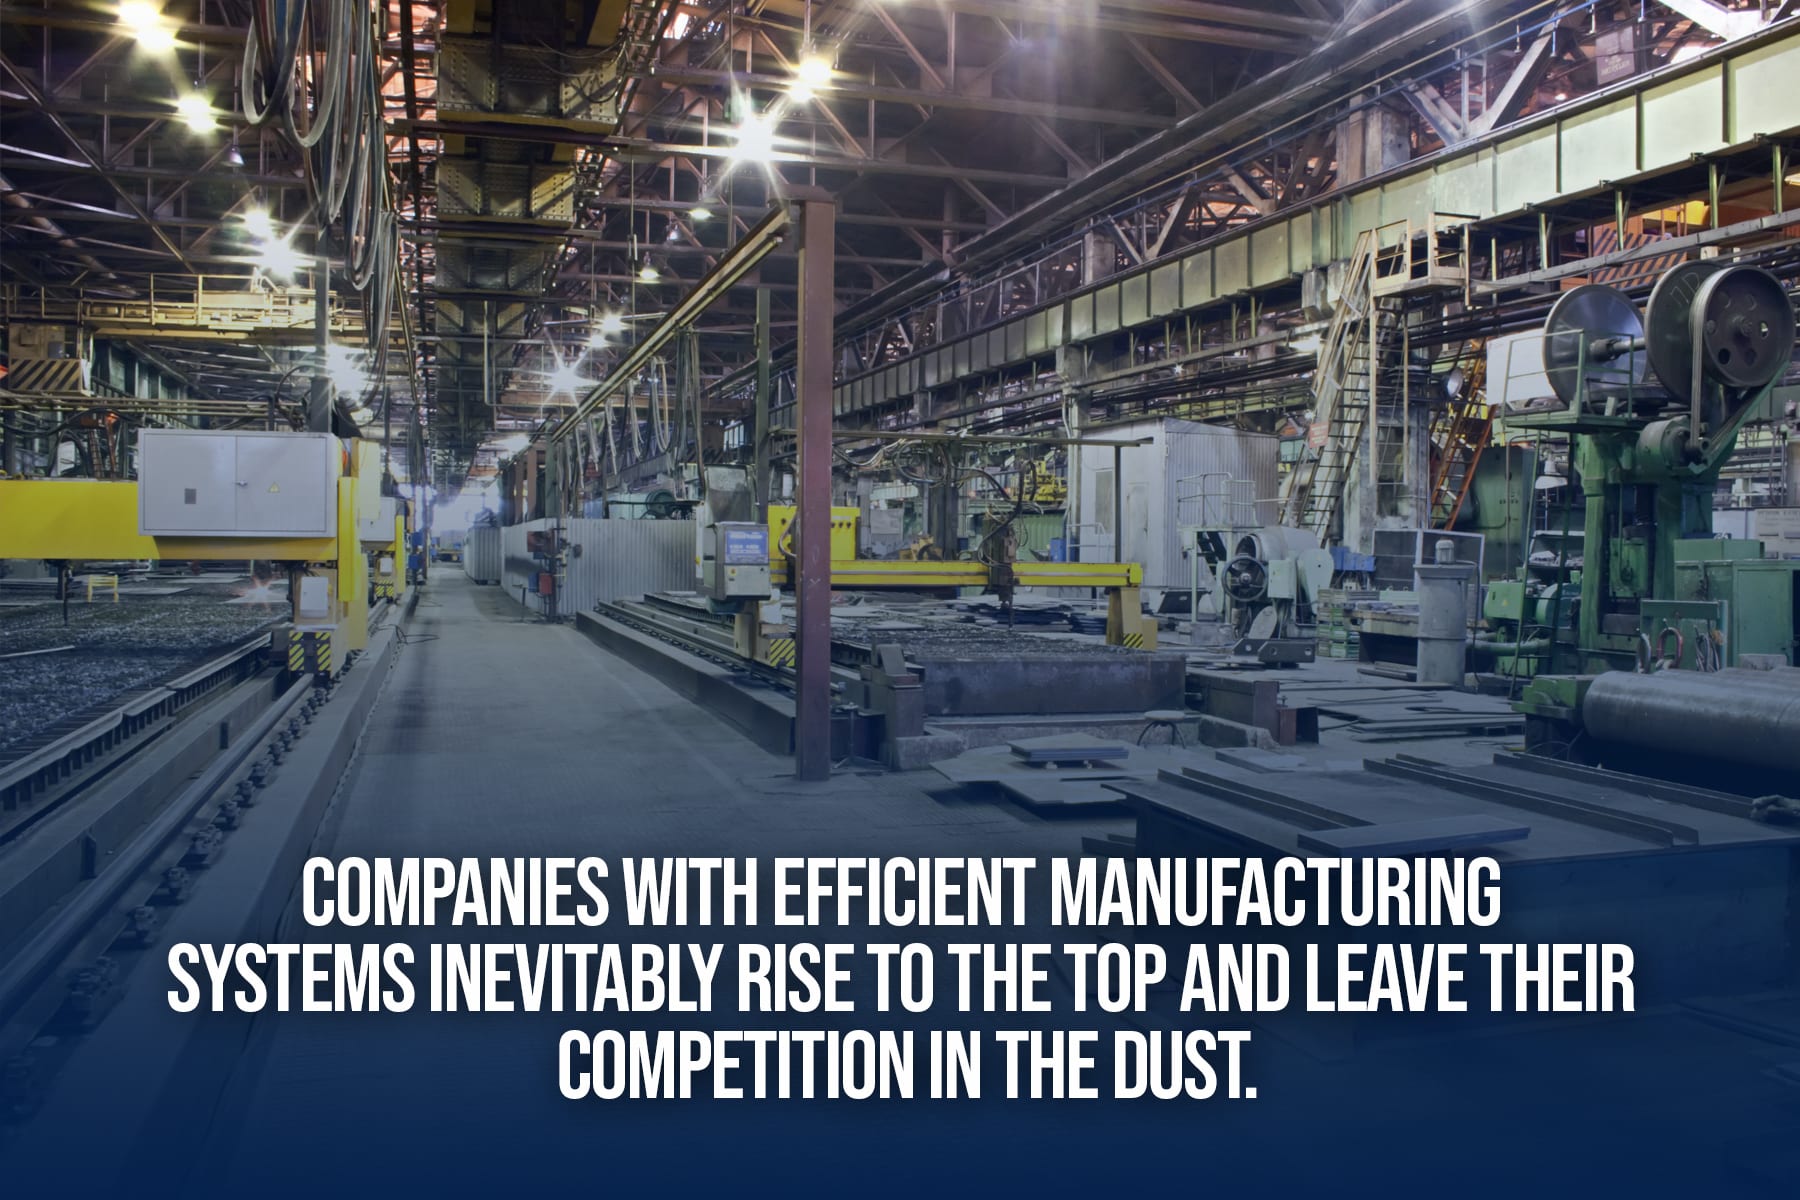 companies with efficient manufacturing systems are more successful